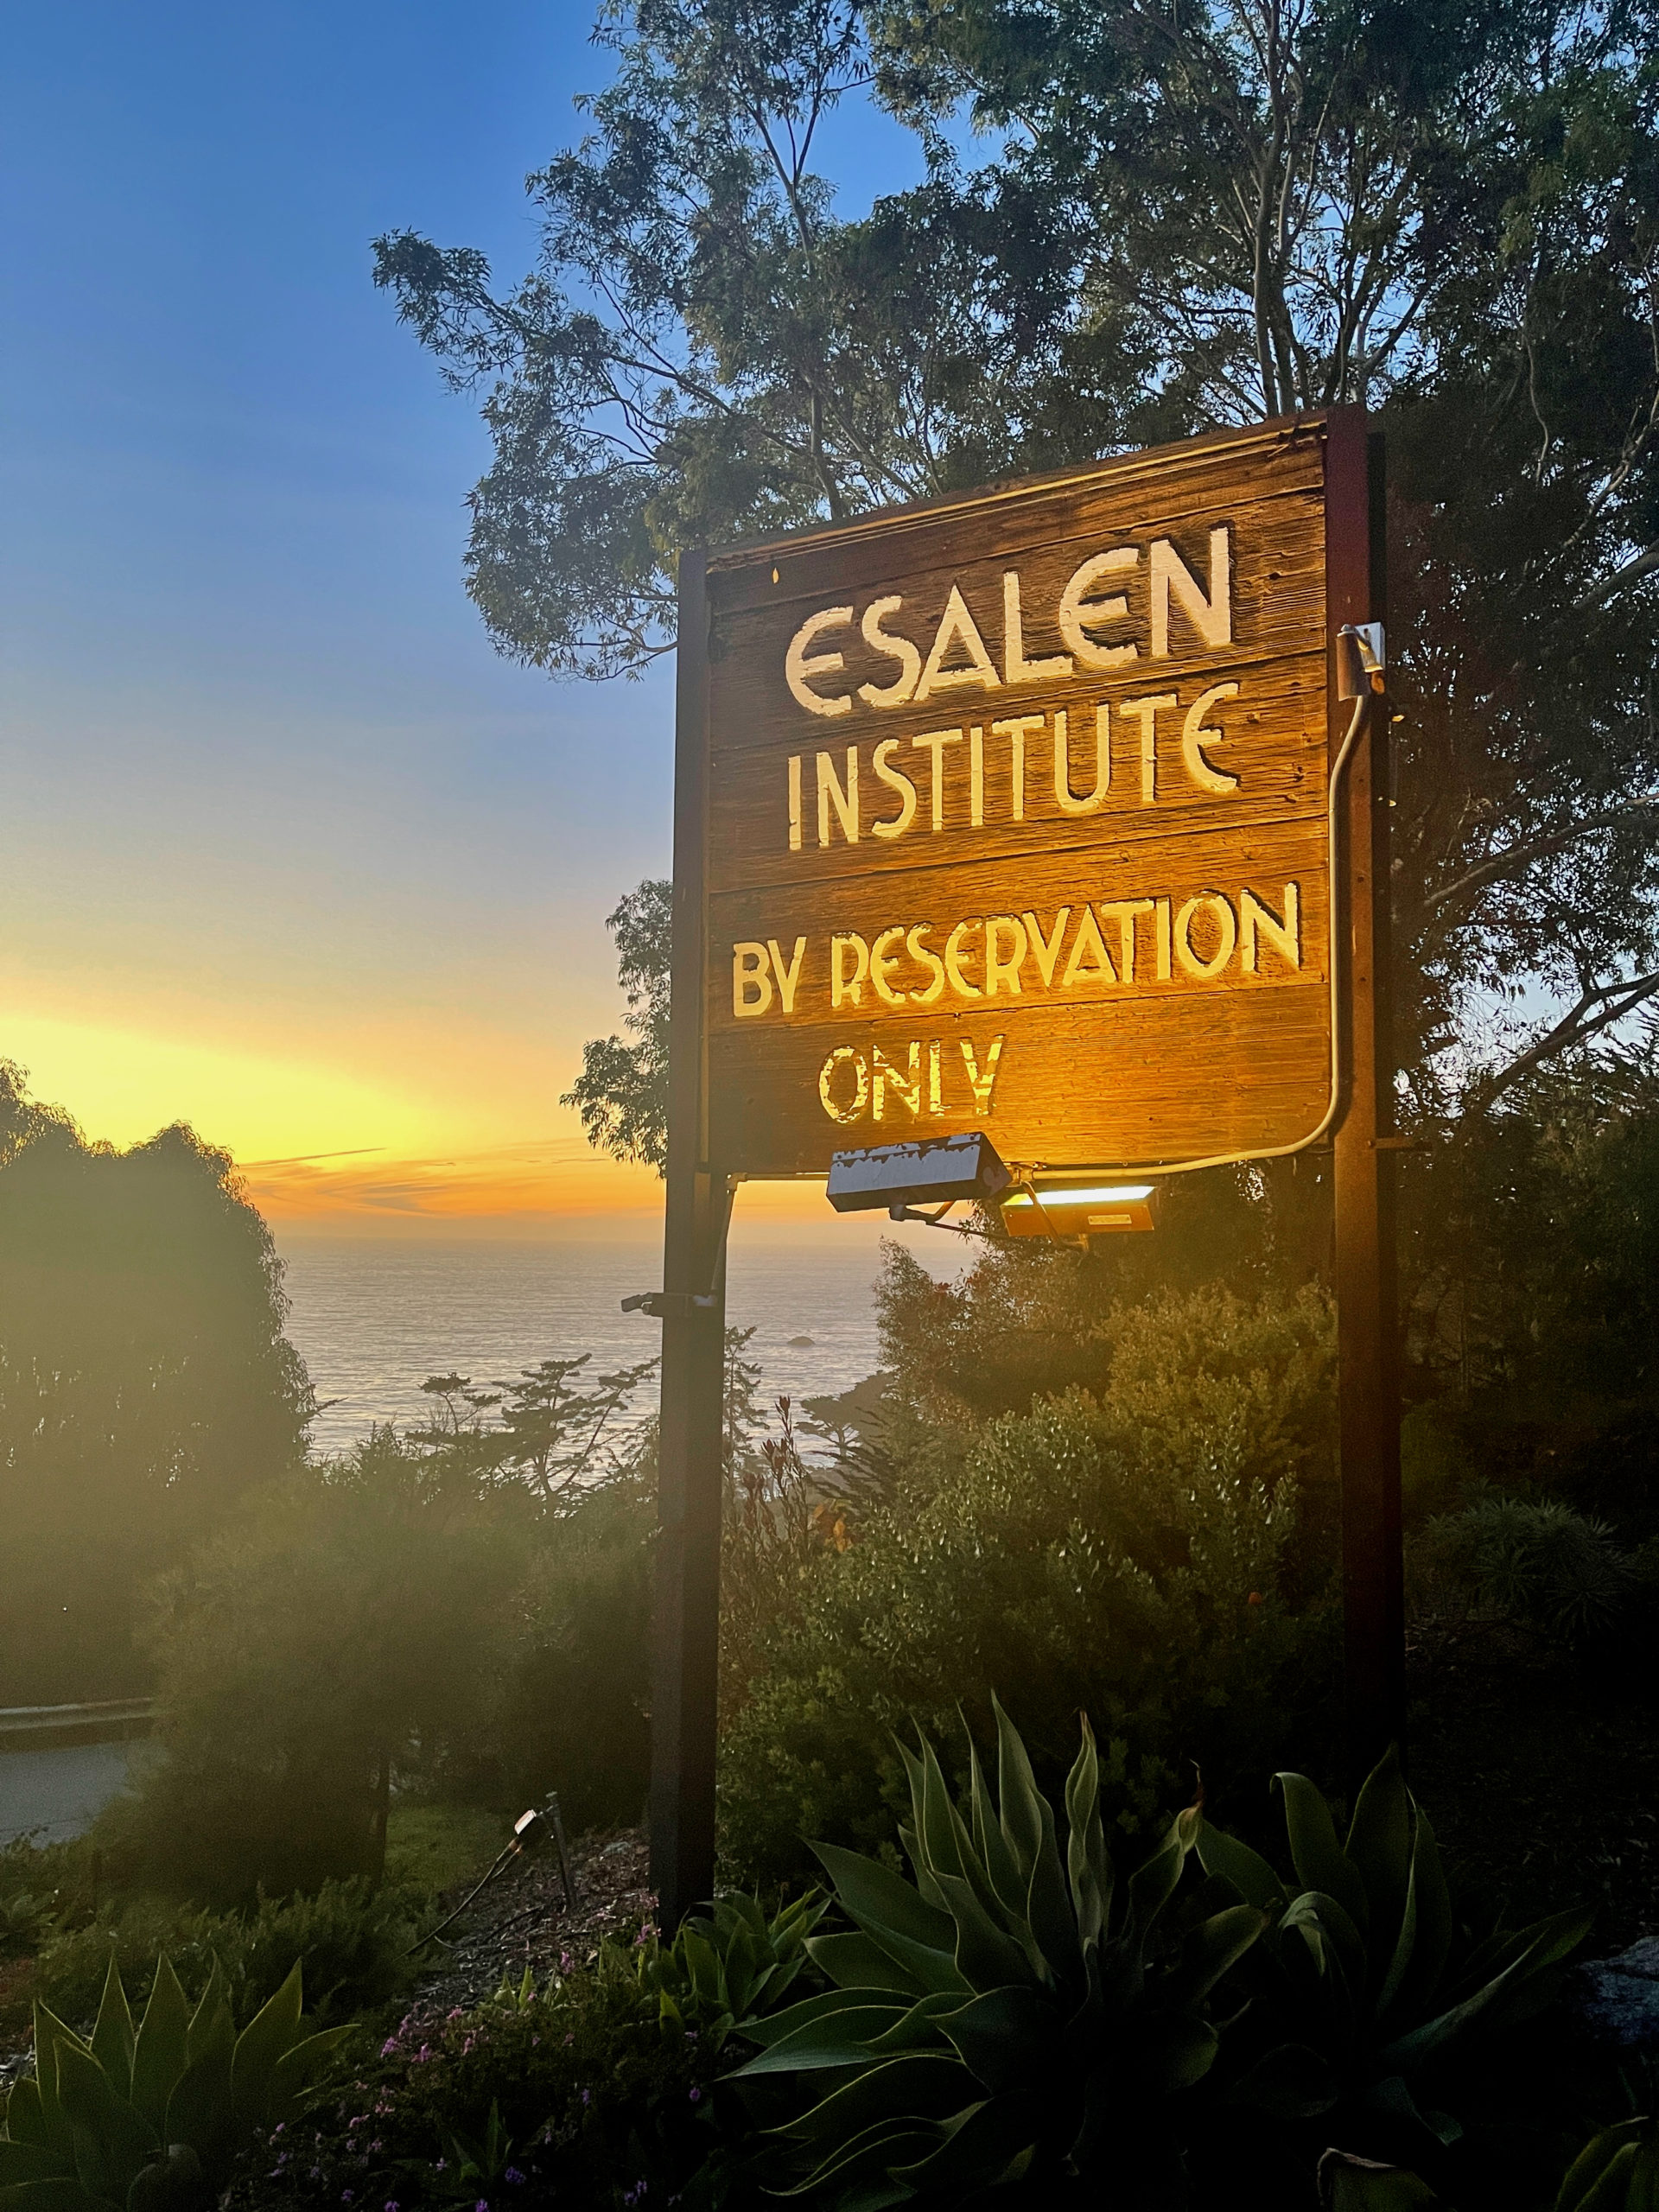 Esalen Institute sign with sunset in background